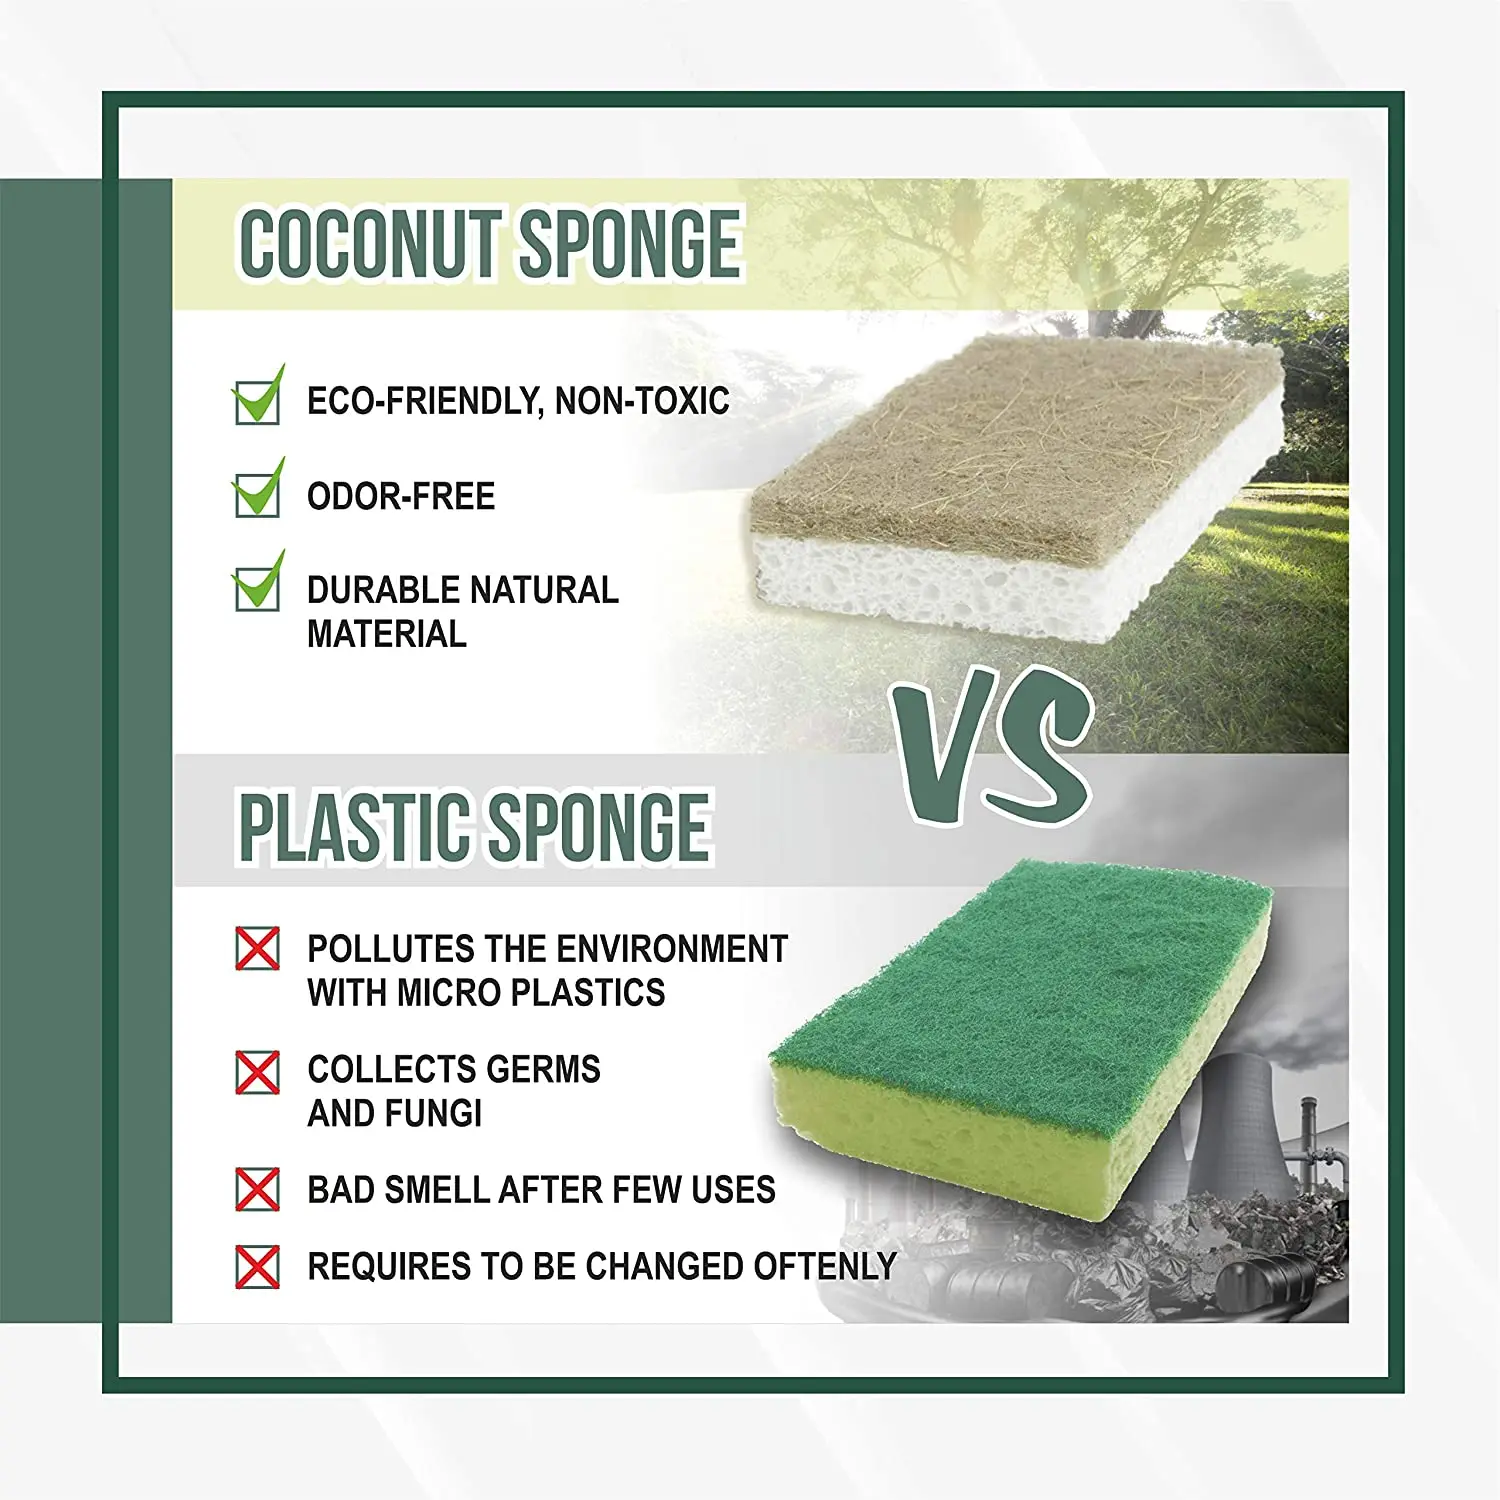 100% Natural  Biodegradable Coconut Sponge Household Mesh Wash Cleaning Scouring Pad Cellulose Sponge Products For Kitchen